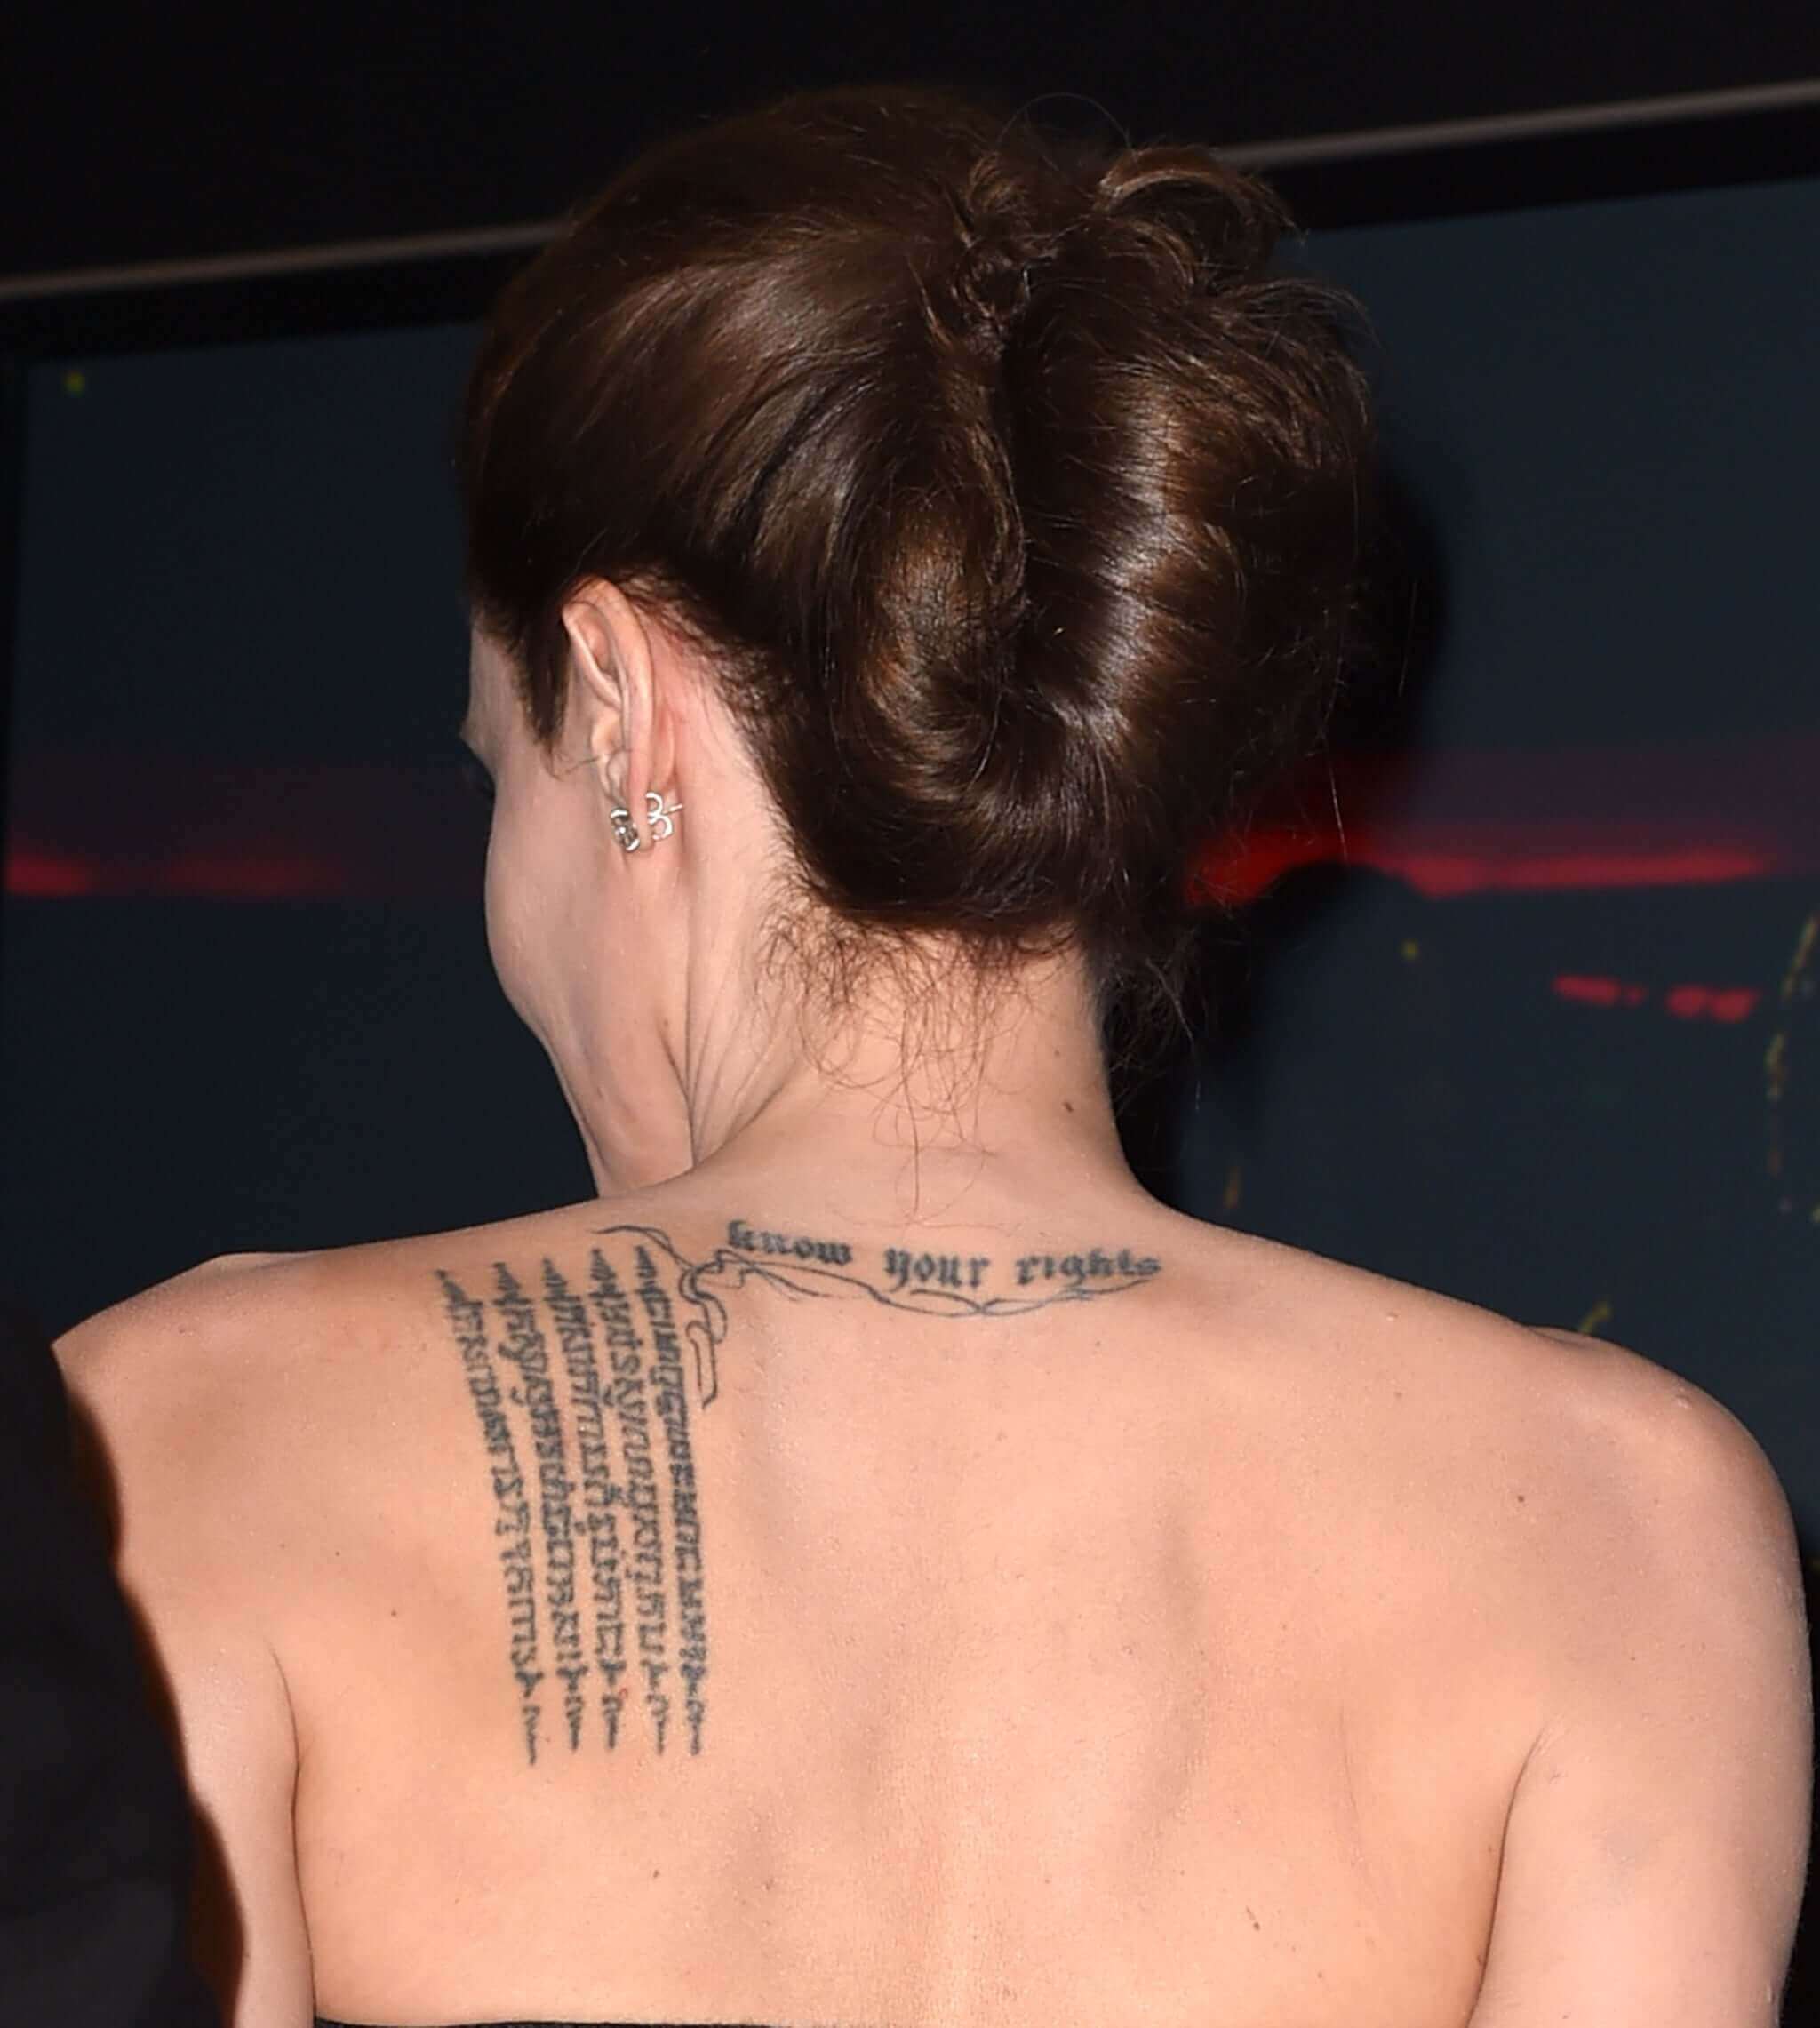 angelina jolie know your rights tattoo